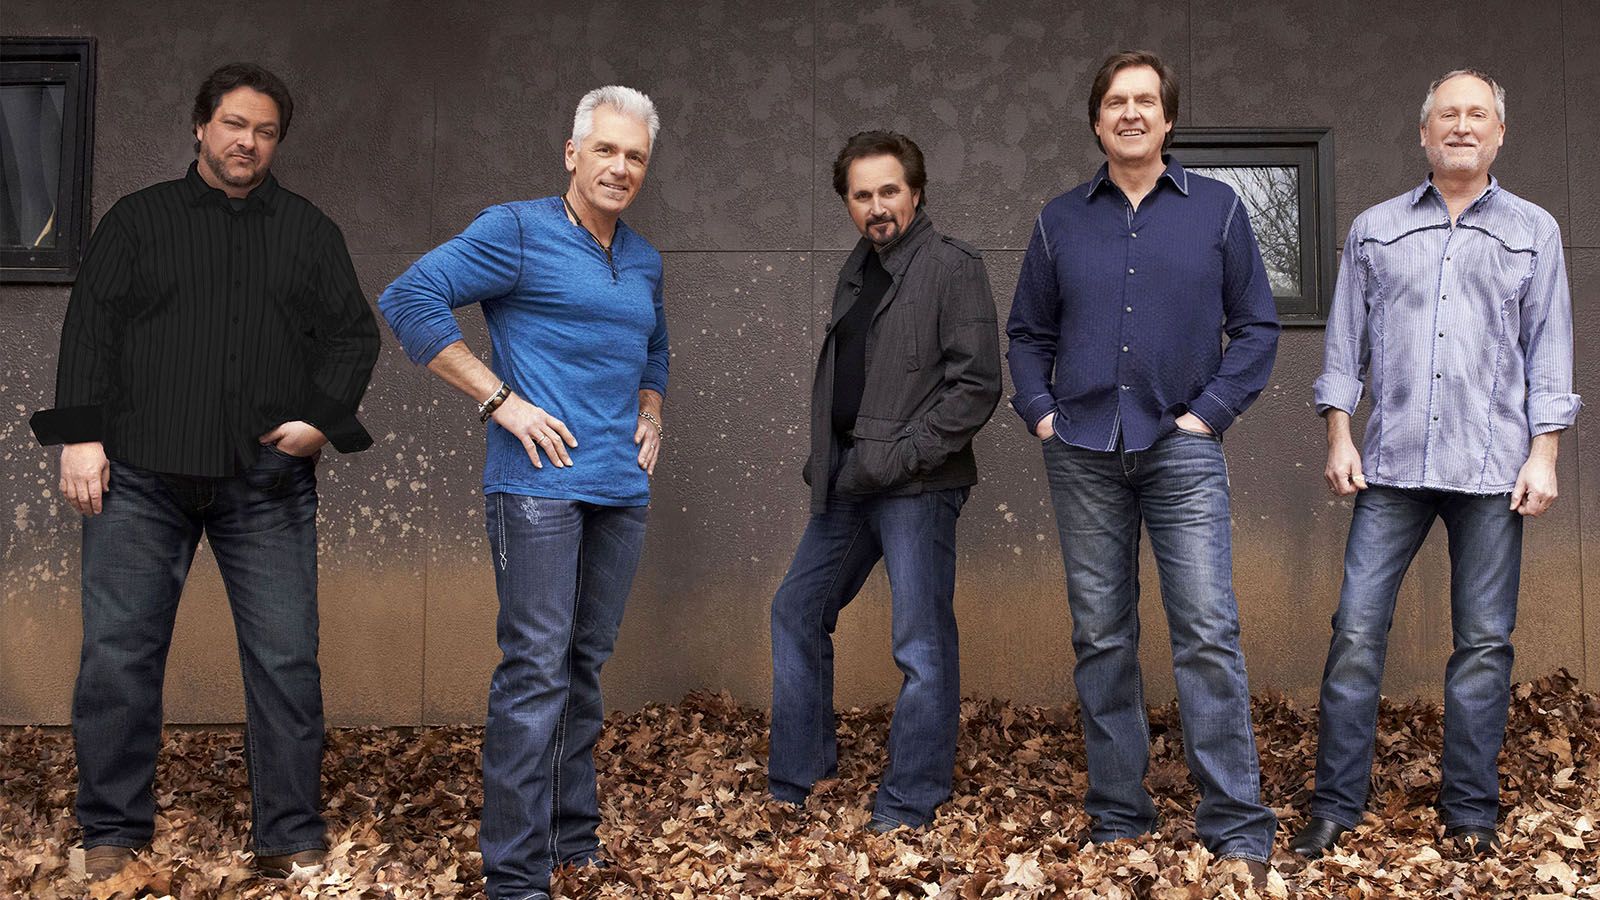 Diamond Rio will be at The Clyde Theatre on Dec. 15.